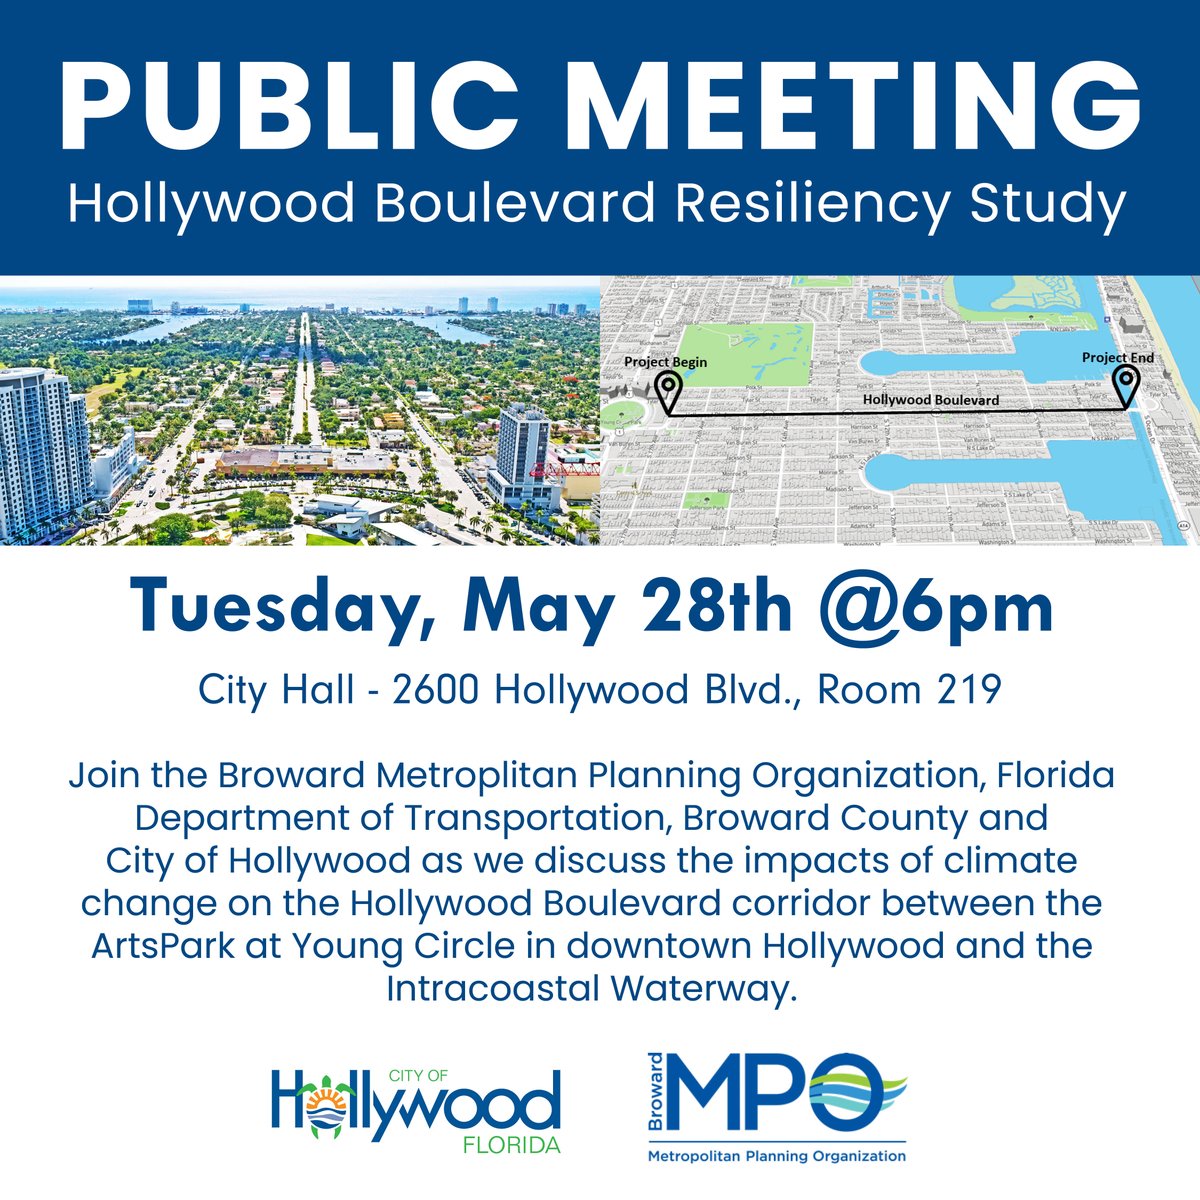 Join the Broward MPO, FDOT, Broward County and City of Hollywood to learn about the impacts of climate change on the Hollywood Blvd corridor between the ArtsPark at Young Circle in downtown Hollywood and the lntracoastal Waterway.